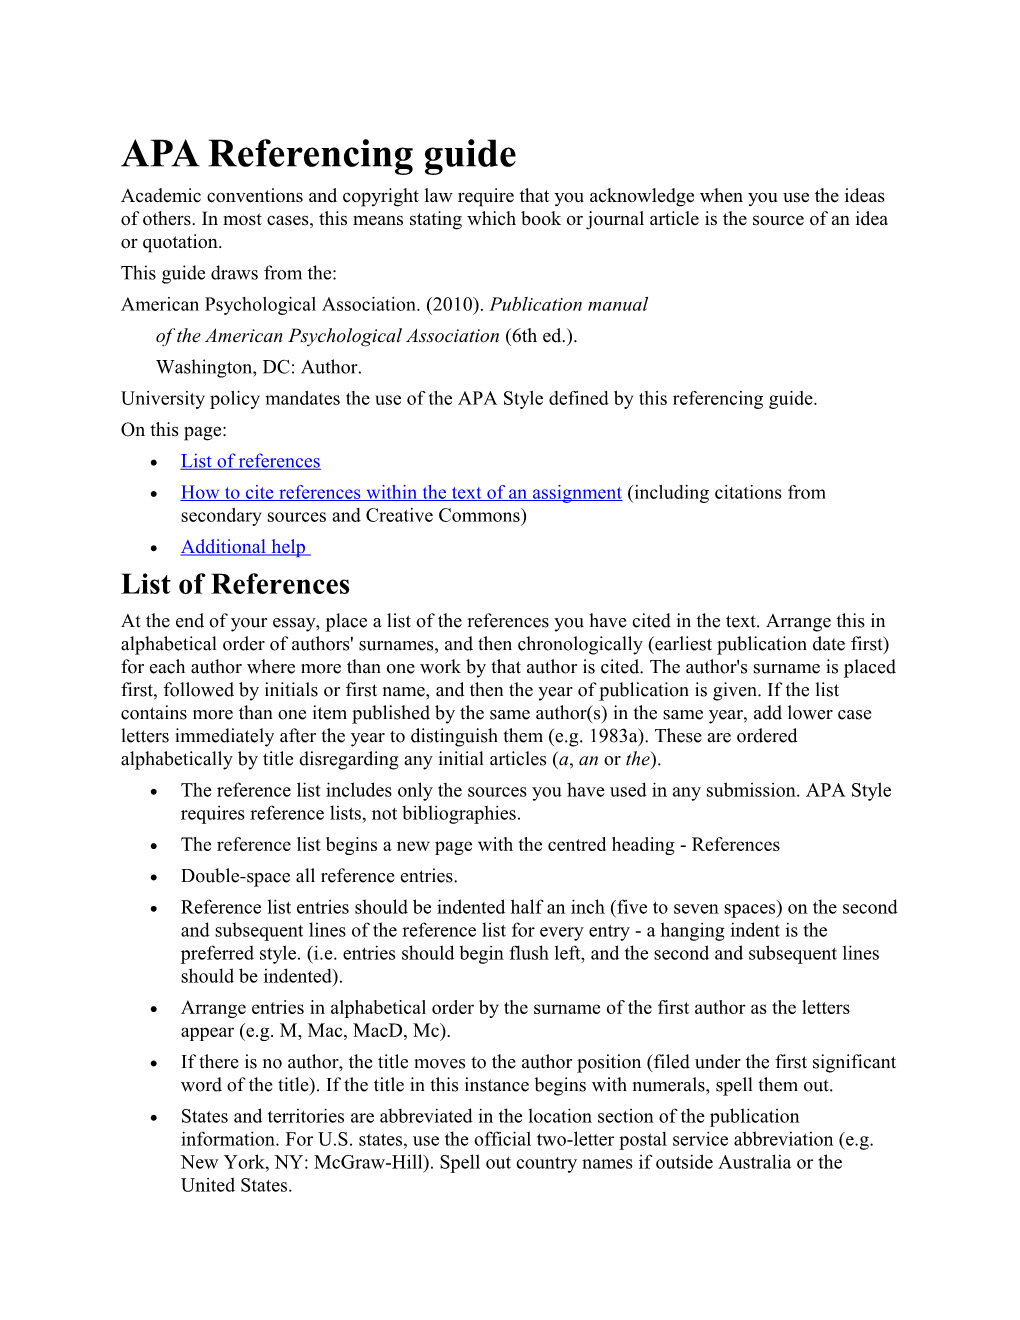 APA Referencing Guide s1